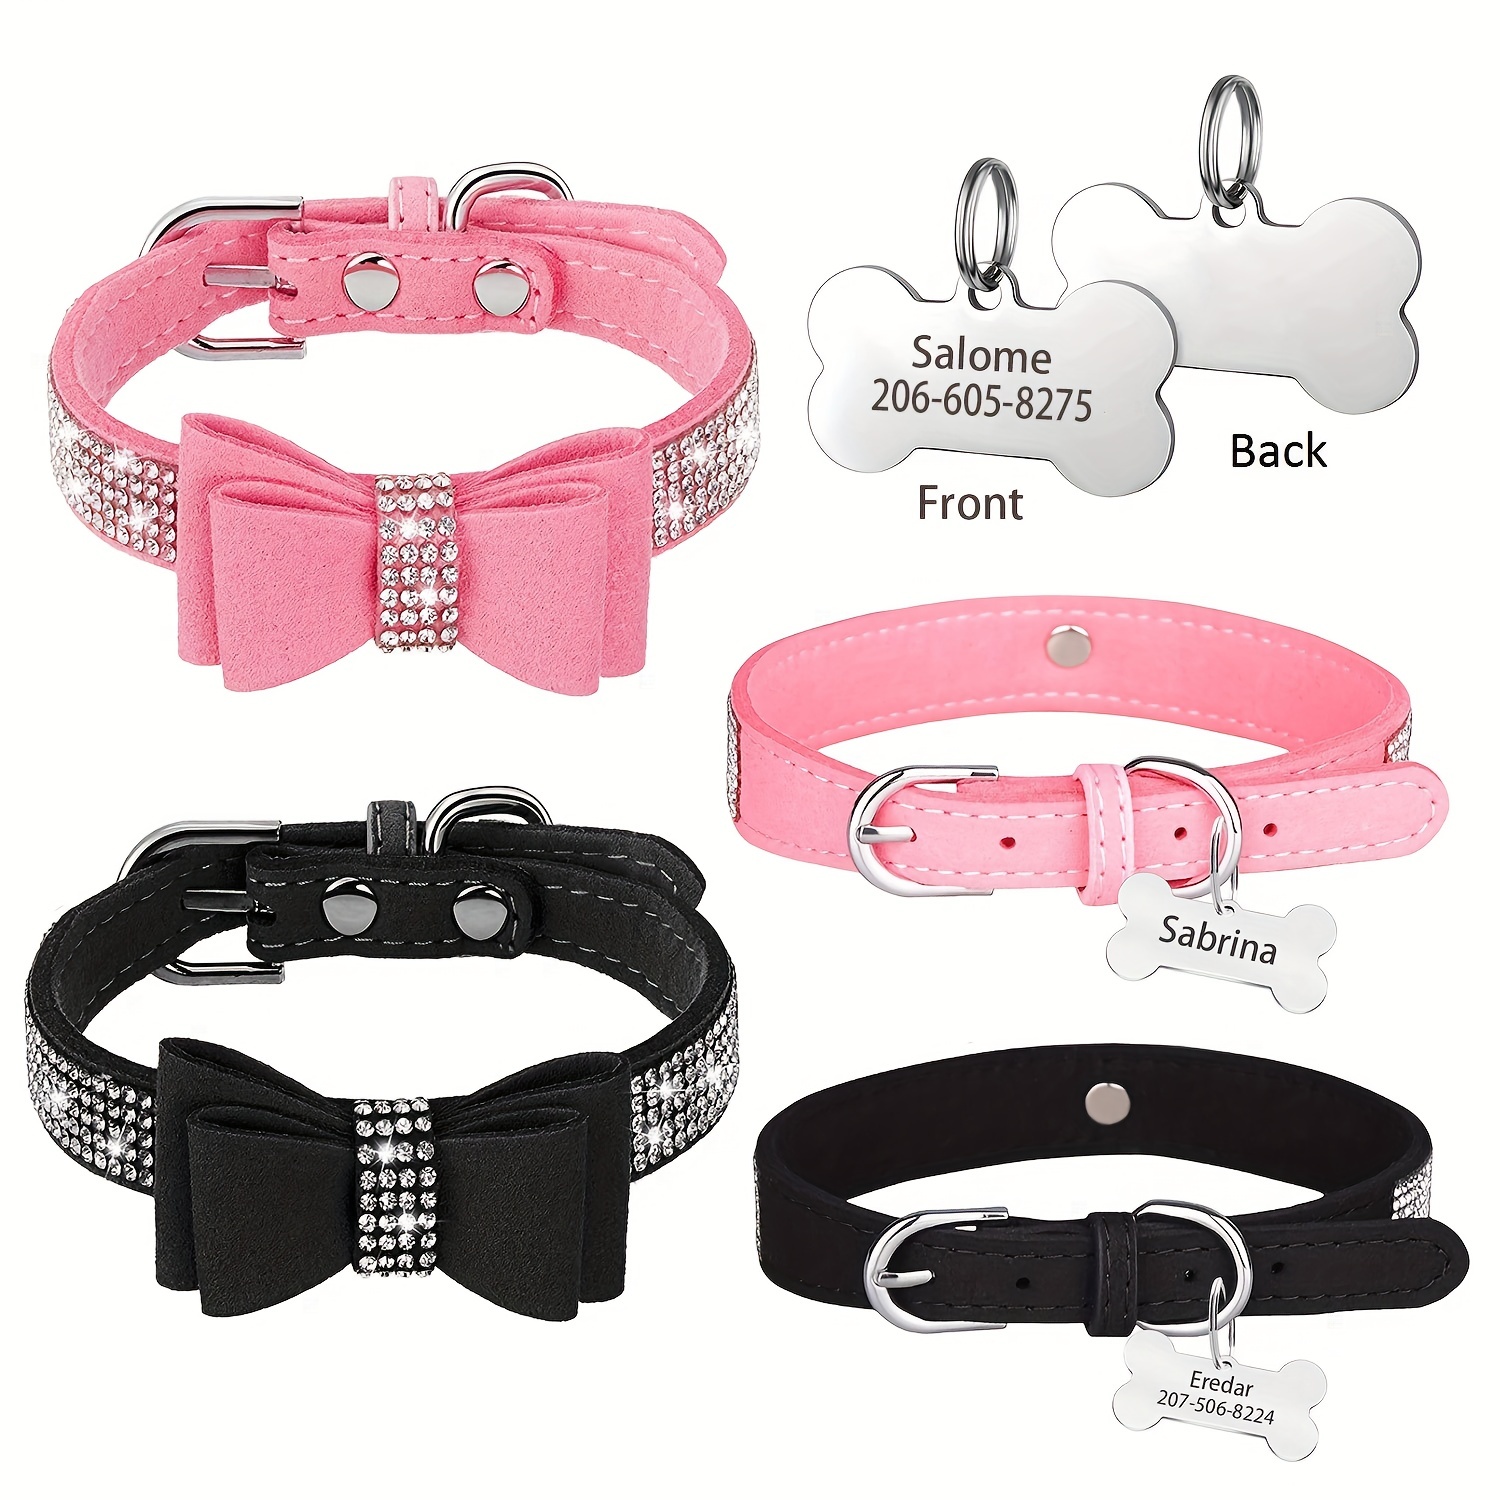 Rhinestone Dog Collar, Bling Diamond Pet Collars with Leash Adjustable,  Dazzling Sparkly Crystal Studded Microfiber Leather Spiked Puppy Collar Cute  for Small and Medium Large Girl Dogs Cats 